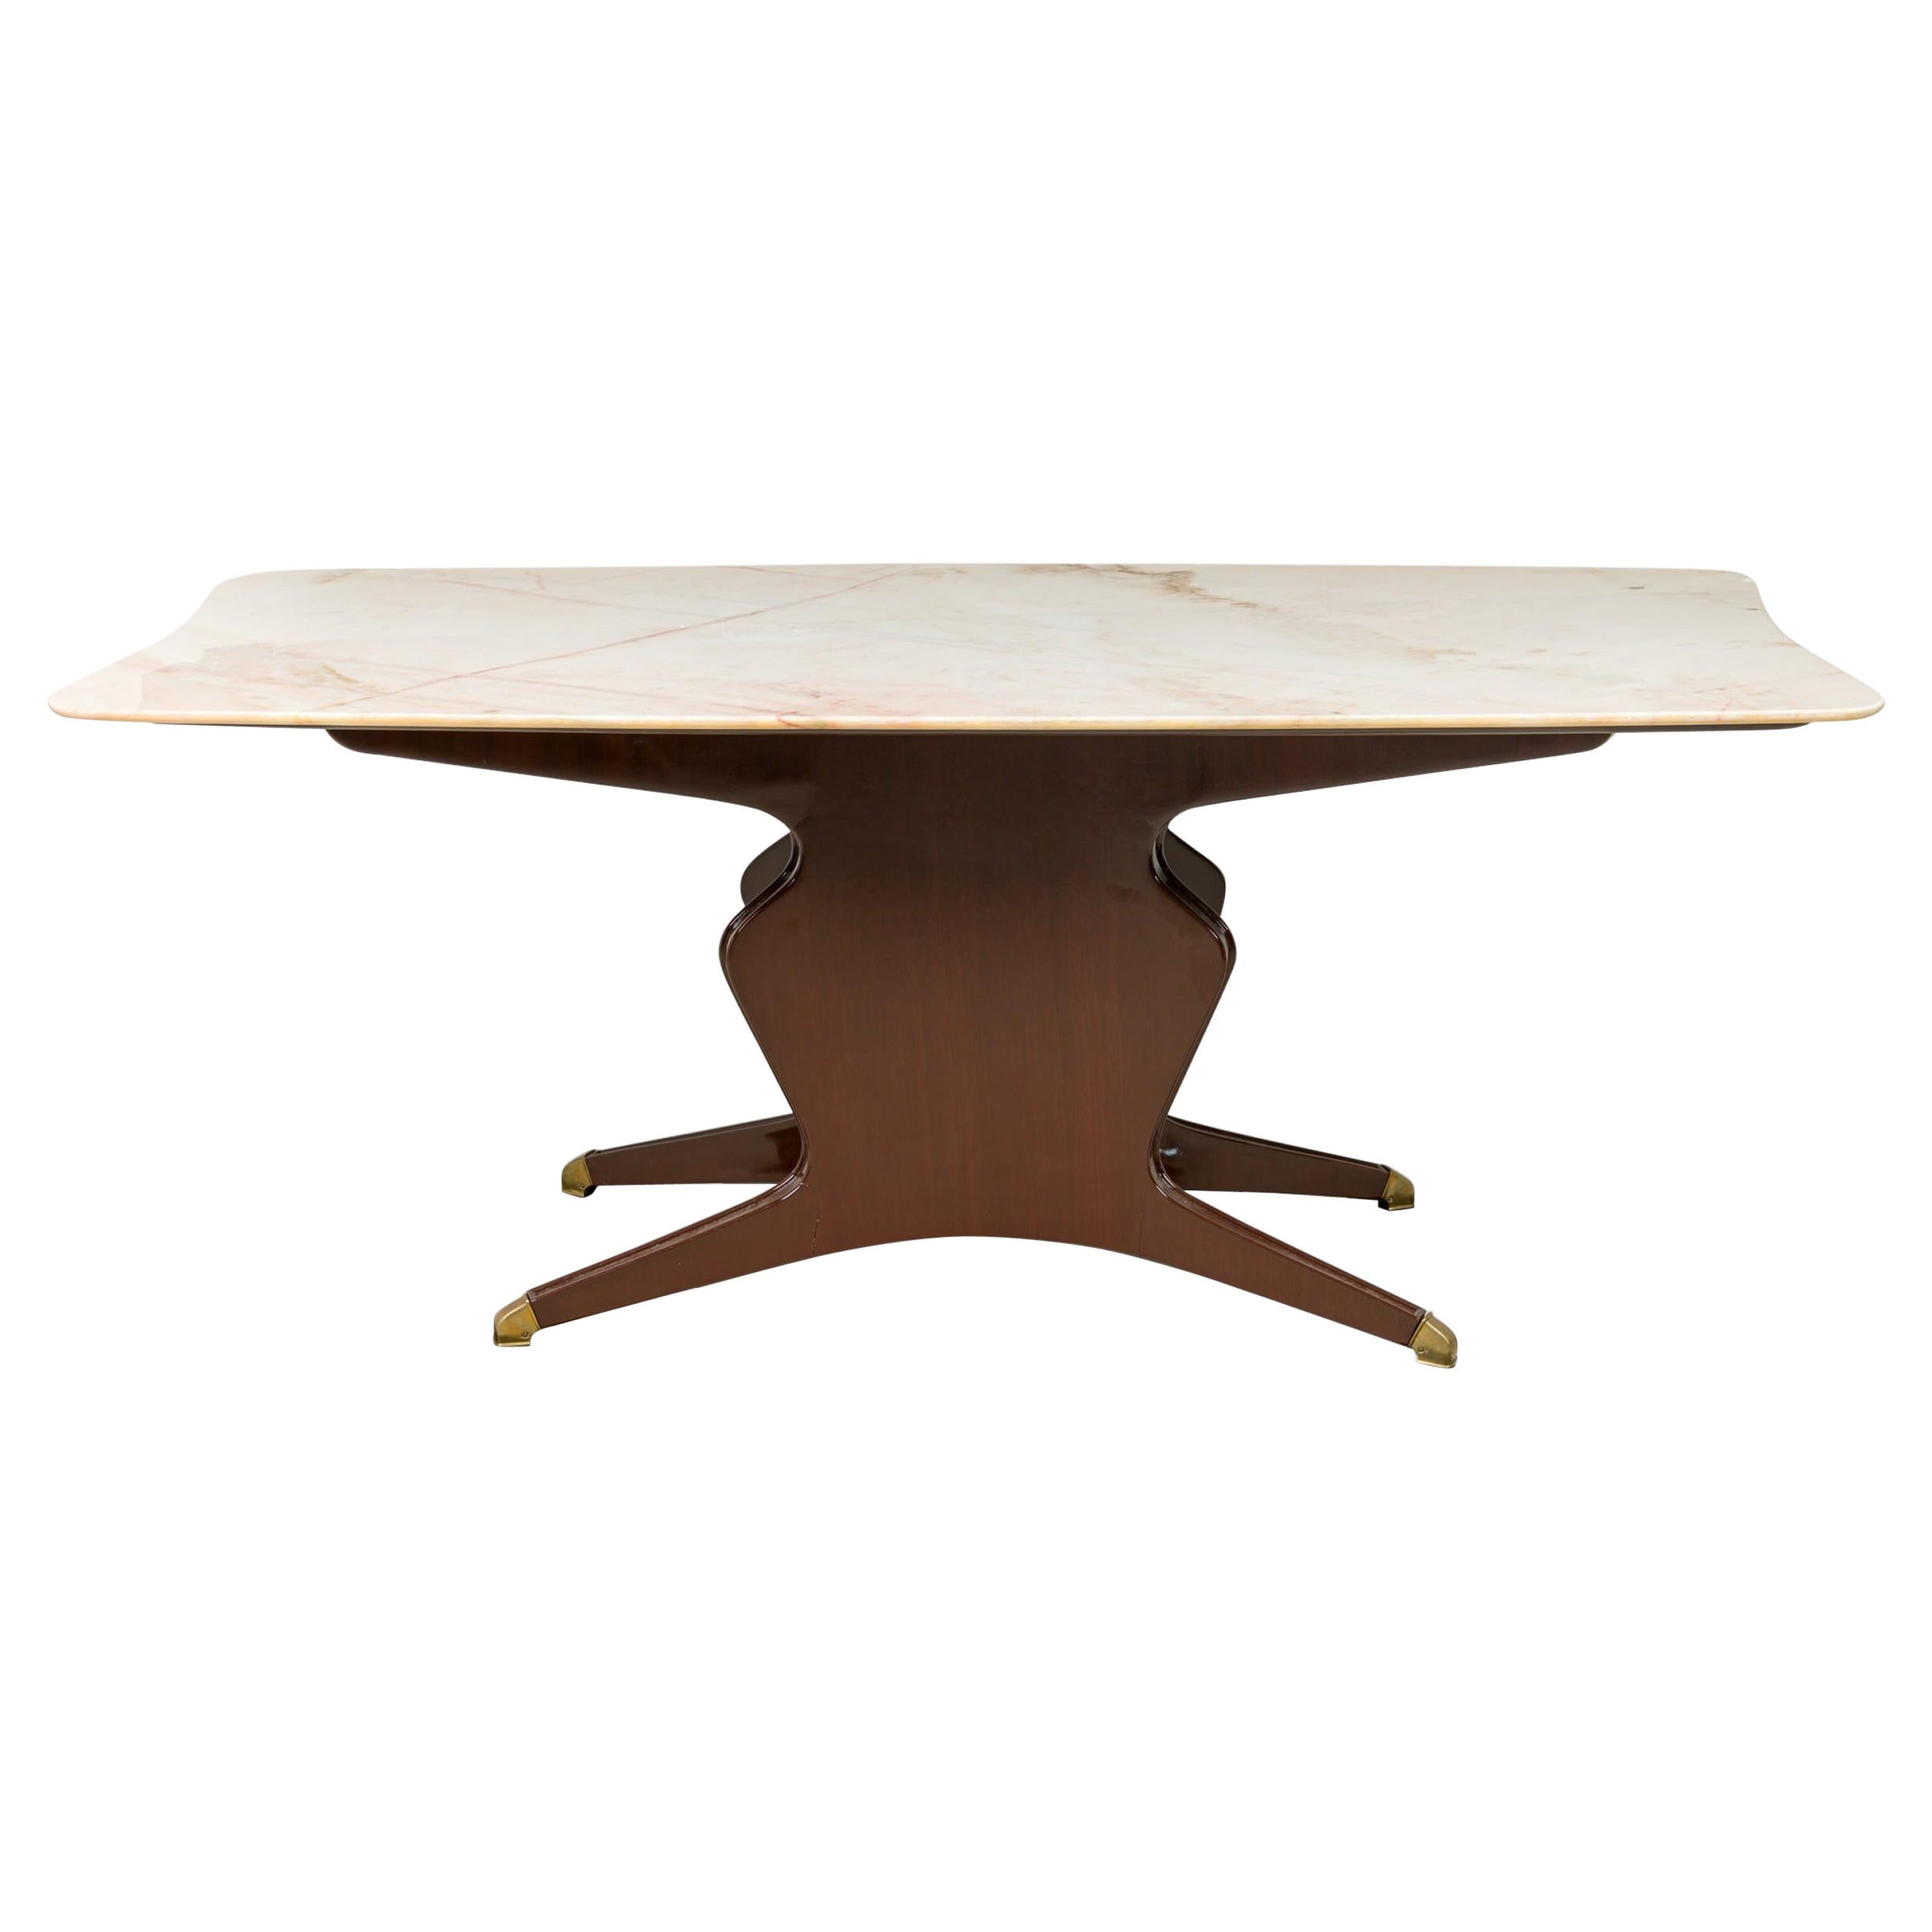 Italian Modern Mahogany, Brass, and White Onyx Dining / Conference Table For Sale